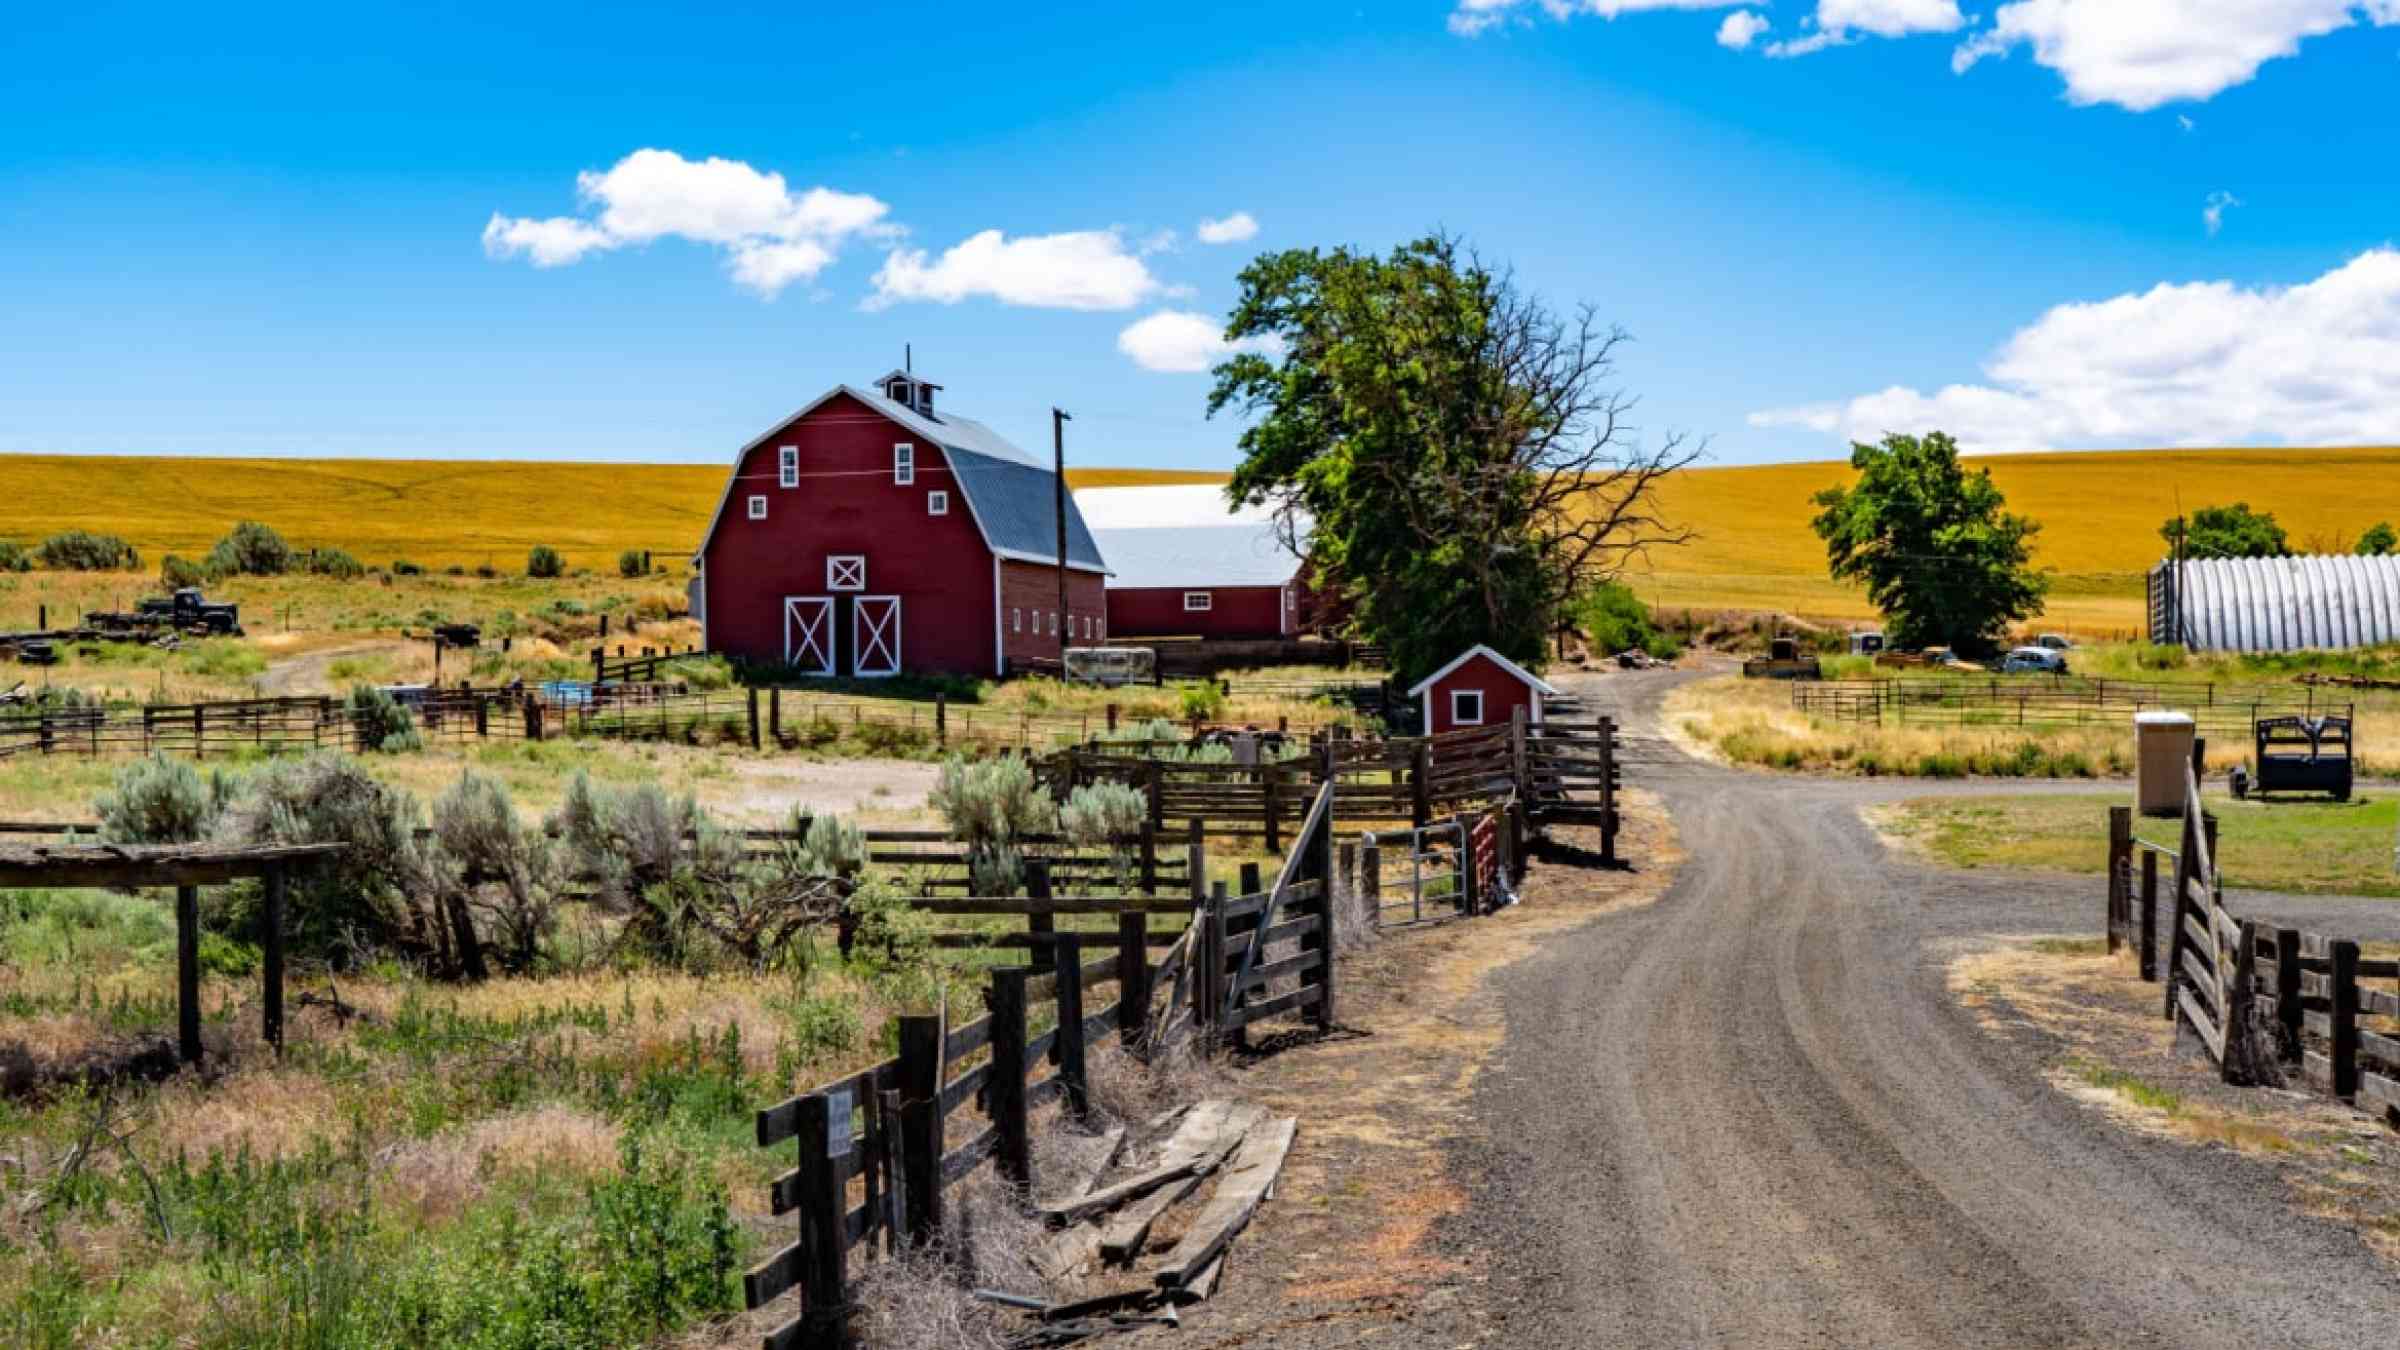 A farm with a red barn in the countryside in Oregon, USA.